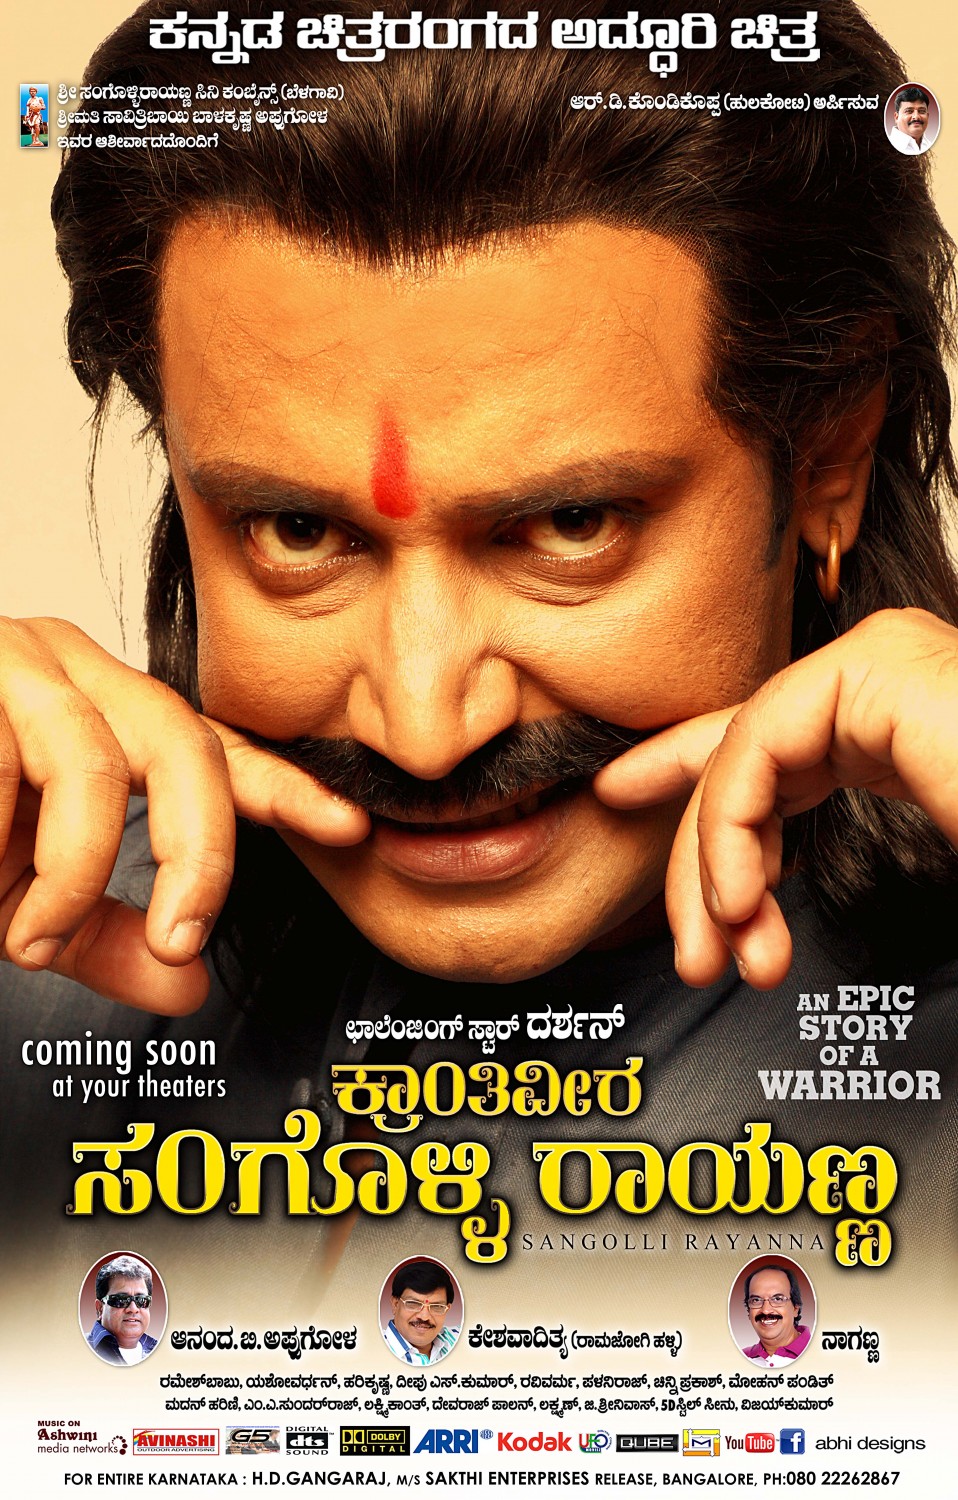 Extra Large Movie Poster Image for Sangolli Rayanna (#50 of 79)